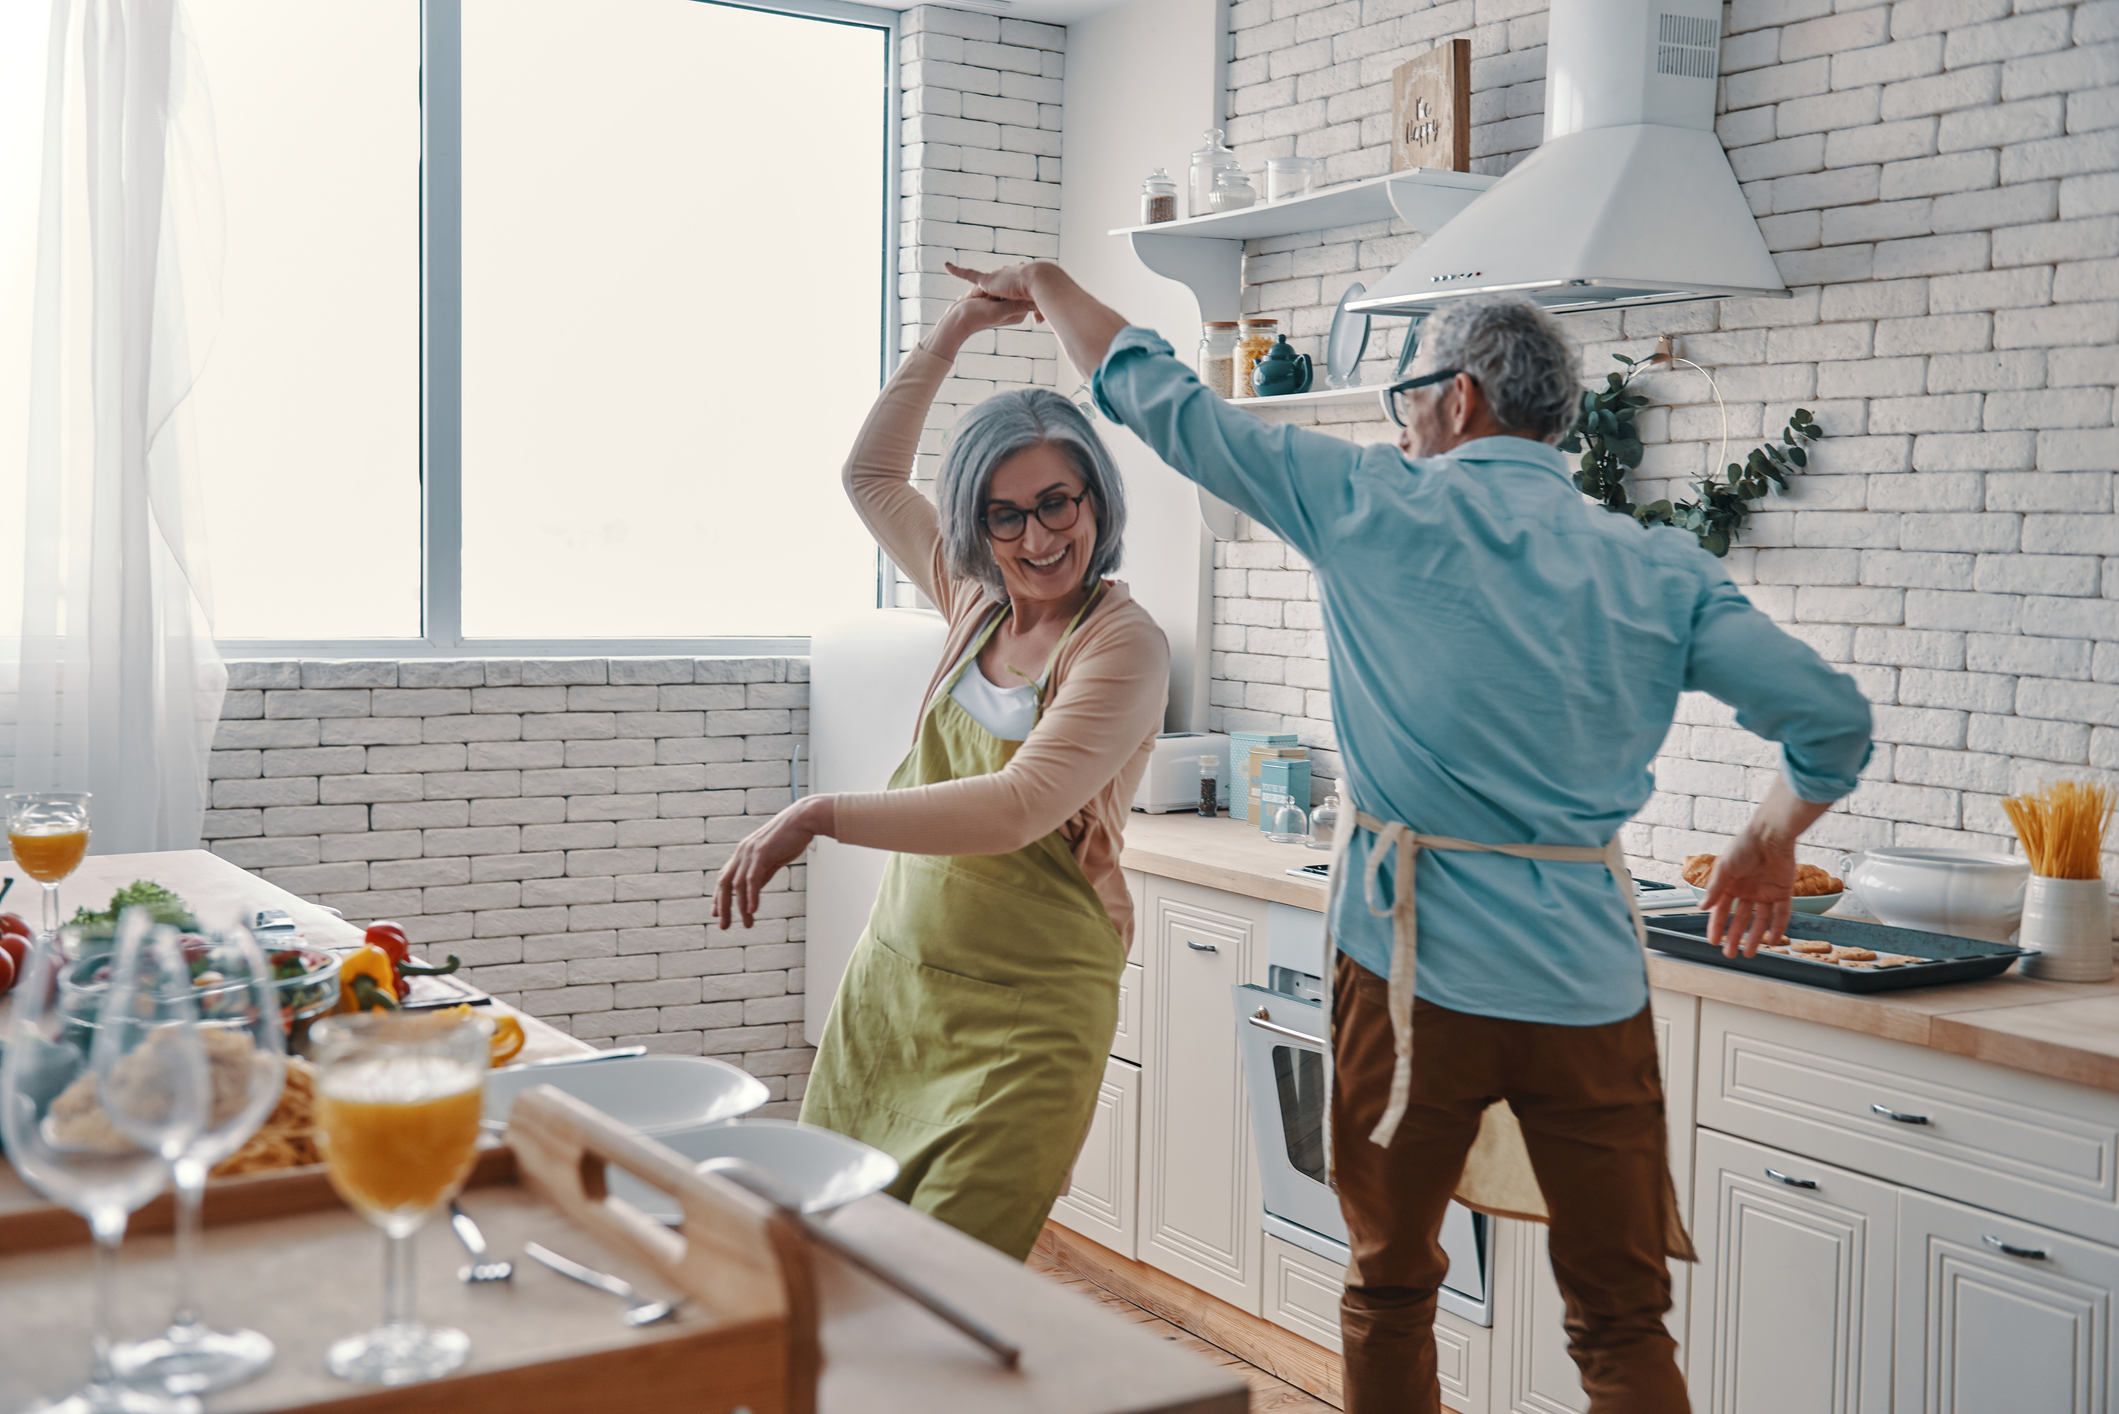 Retirement-age couple wearing aprons dancing in a kitchen